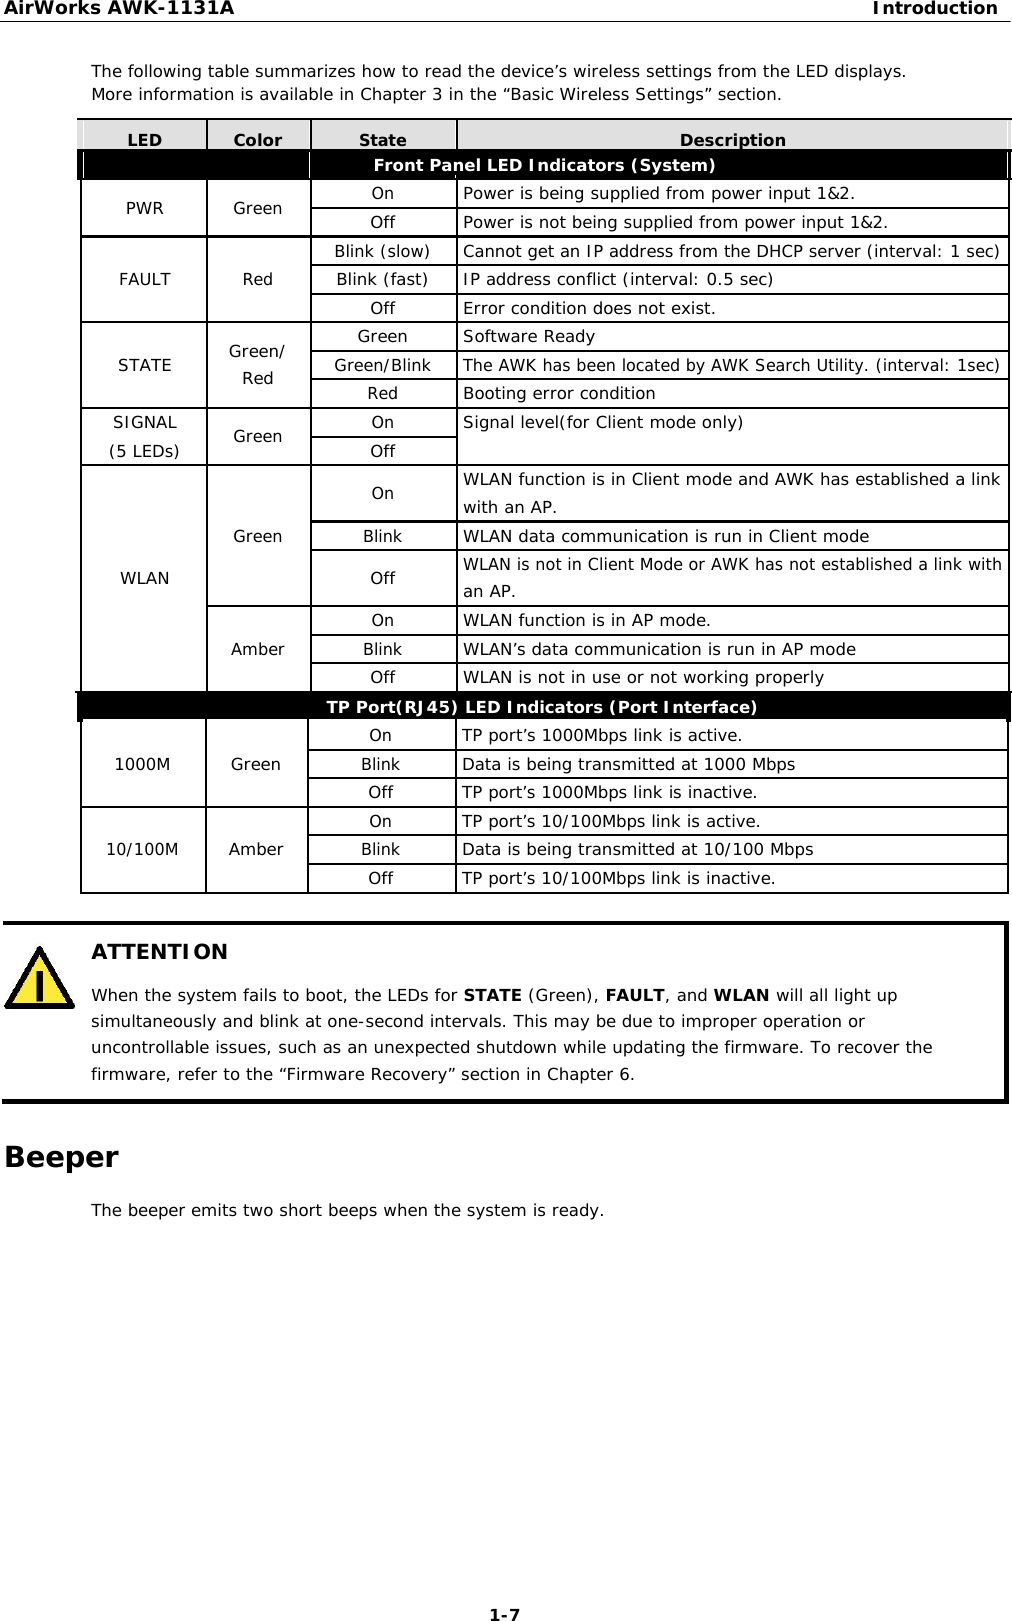 AirWorks AWK-1131A Introduction   The following table summarizes how to read the device’s wireless settings from the LED displays. More information is available in Chapter 3 in the “Basic Wireless Settings” section.    LED Color StateDescription        Front Panel LED Indicators (System)                    PWR Green On Power is being supplied from power input 1&amp;2.              Off Power is not being supplied from power input 1&amp;2.                       Blink (slow)Cannot get an IP address from the DHCP server (interval: 1 sec)               FAULT Red Blink (fast) IP address conflict (interval: 0.5 sec)                    Off Error condition does not exist.                  Green/ Green Software Ready               STATE Green/BlinkThe AWK has been located by AWK Search Utility. (interval: 1sec)    Red               RedBooting error condition                       SIGNAL Green On Signal level(for Client mode only)    (5 LEDs)          Off                            On WLAN function is in Client mode and AWK has established a link        with an AP.                       Green BlinkWLAN data communication is run in Client mode                 WLAN  Off WLAN is not in Client Mode or AWK has not established a link with      an AP.                         On WLAN function is in AP mode.                 Amber BlinkWLAN’s data communication is run in AP mode                    Off WLAN is not in use or not working properly              TP Port(RJ45) LED Indicators (Port Interface)     On TP port’s 1000Mbps link is active.           1000M Green BlinkData is being transmitted at 1000 Mbps                Off TP port’s 1000Mbps link is inactive.          On TP port’s 10/100Mbps link is active.            10/100M Amber BlinkData is being transmitted at 10/100 Mbps                Off TP port’s 10/100Mbps link is inactive.             ATTENTION  When the system fails to boot, the LEDs for STATE (Green), FAULT, and WLAN will all light up simultaneously and blink at one-second intervals. This may be due to improper operation or uncontrollable issues, such as an unexpected shutdown while updating the firmware. To recover the firmware, refer to the “Firmware Recovery” section in Chapter 6.   Beeper  The beeper emits two short beeps when the system is ready.                   1-7 